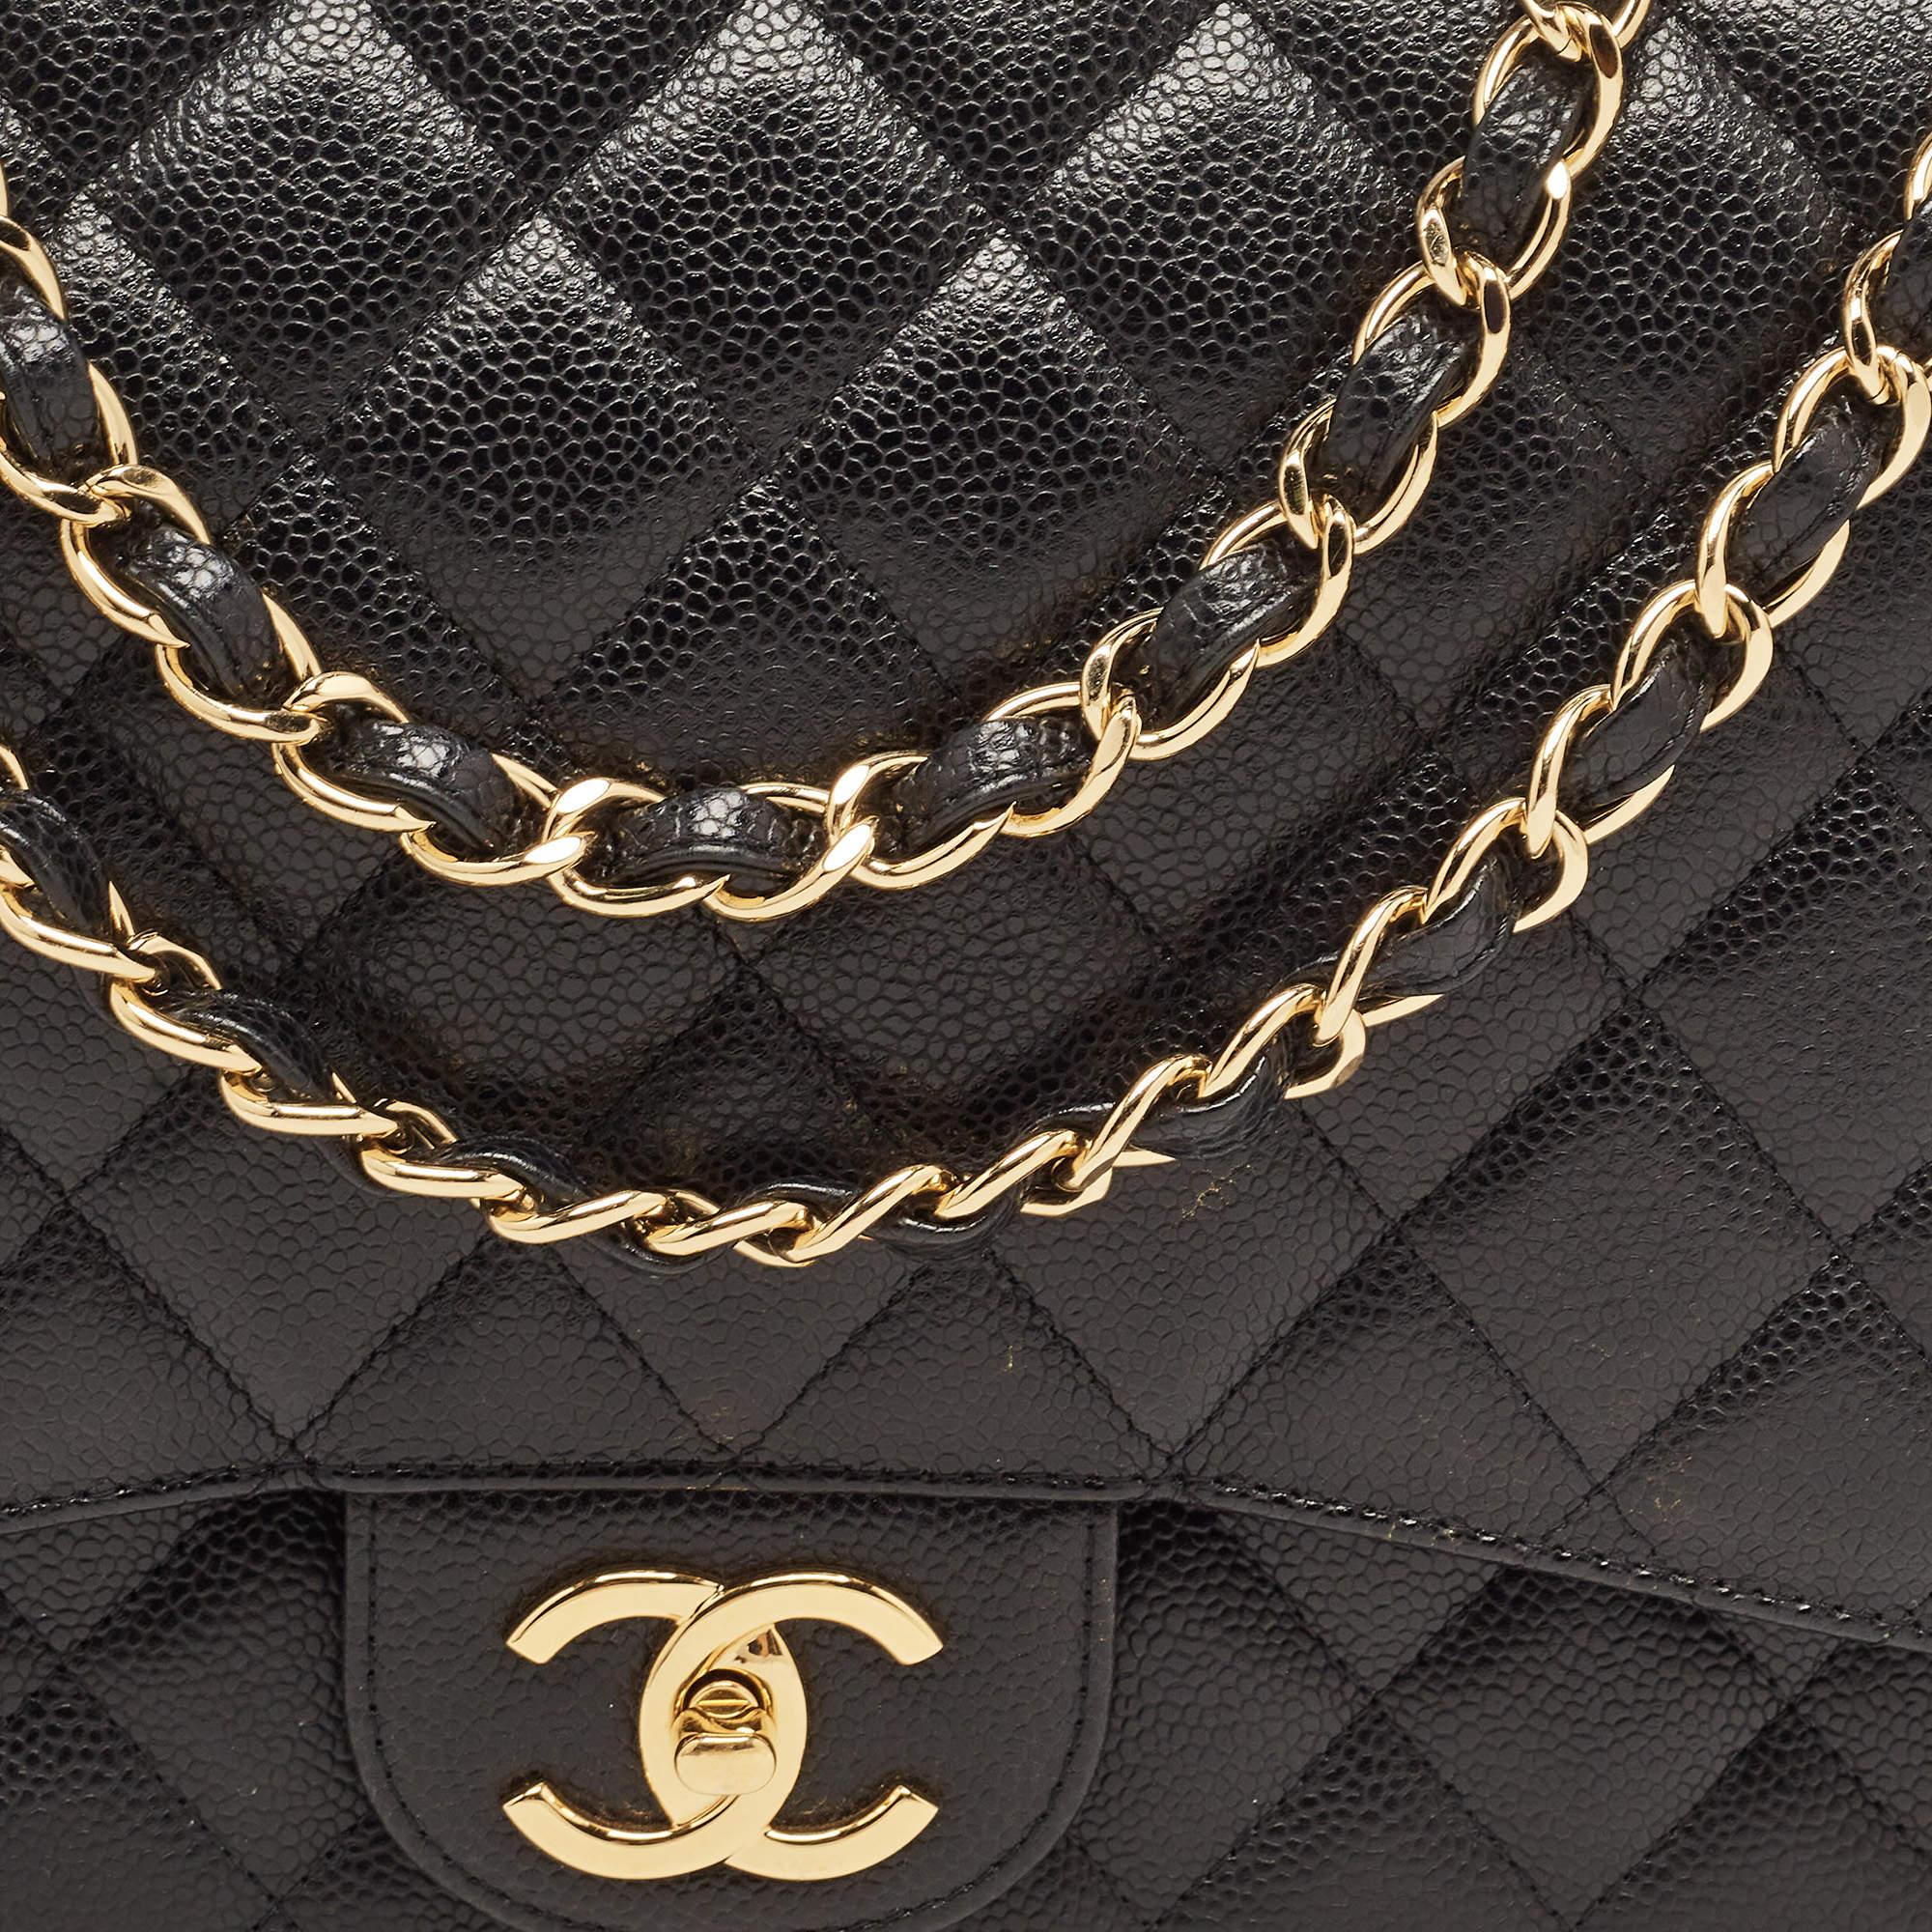 Chanel Black Quilted Caviar Leather Maxi Classic Double Flap Bag 2